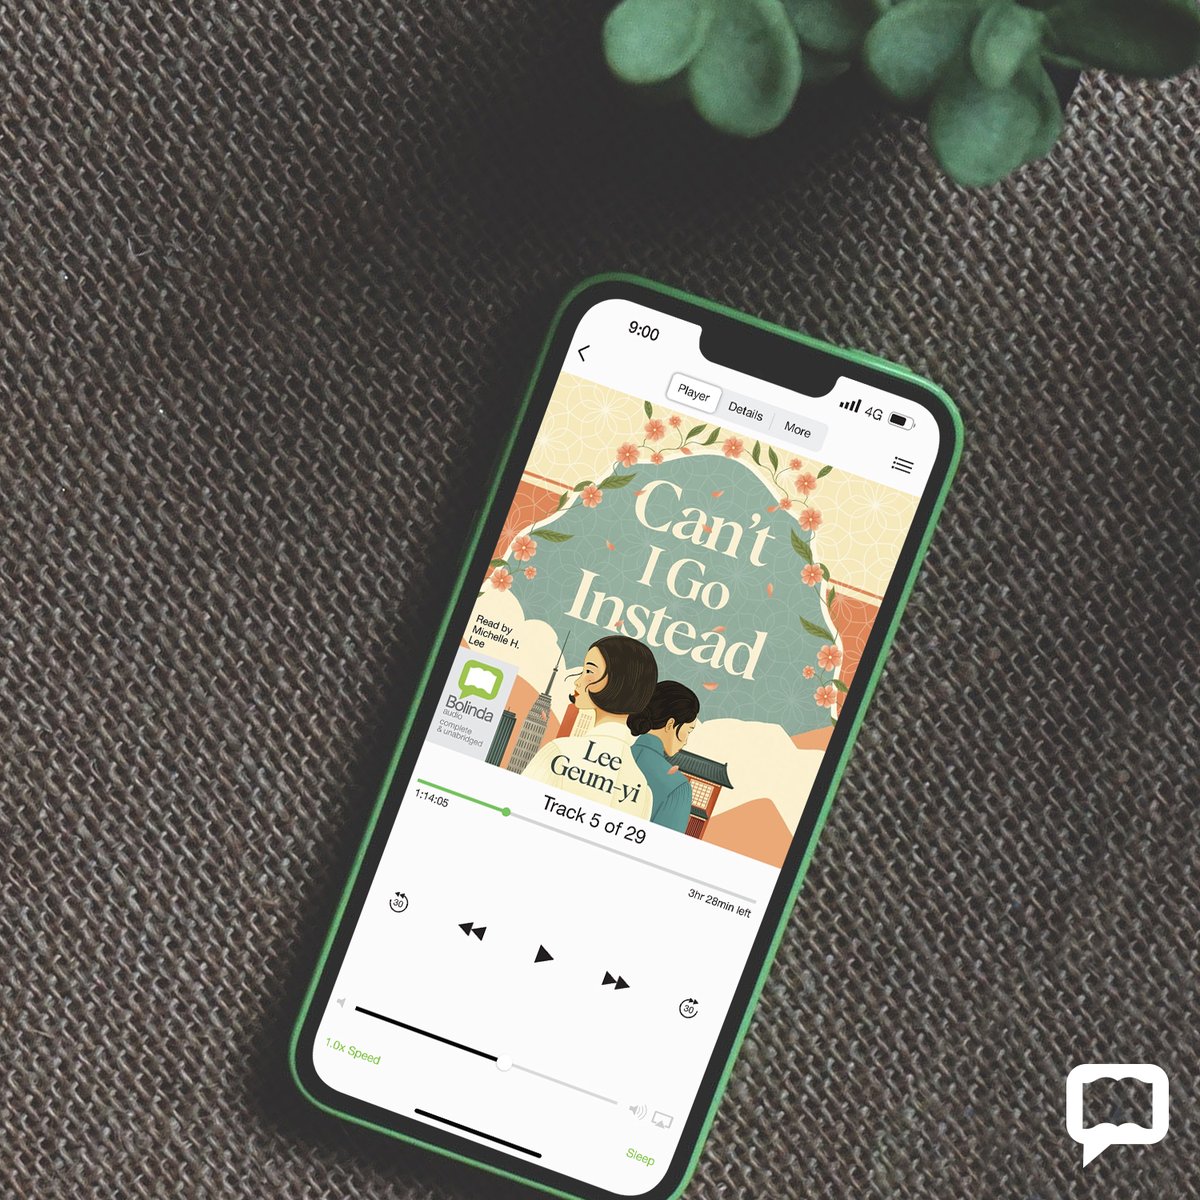 Explore Lee Geum-yi's poignant tale, Can't I Go Instead, weaving the lives of a nobleman's daughter and her maidservant through class divisions, hardship, and identity struggles in 20th-century Korea. Listen on BorrowBox now! @scribepub